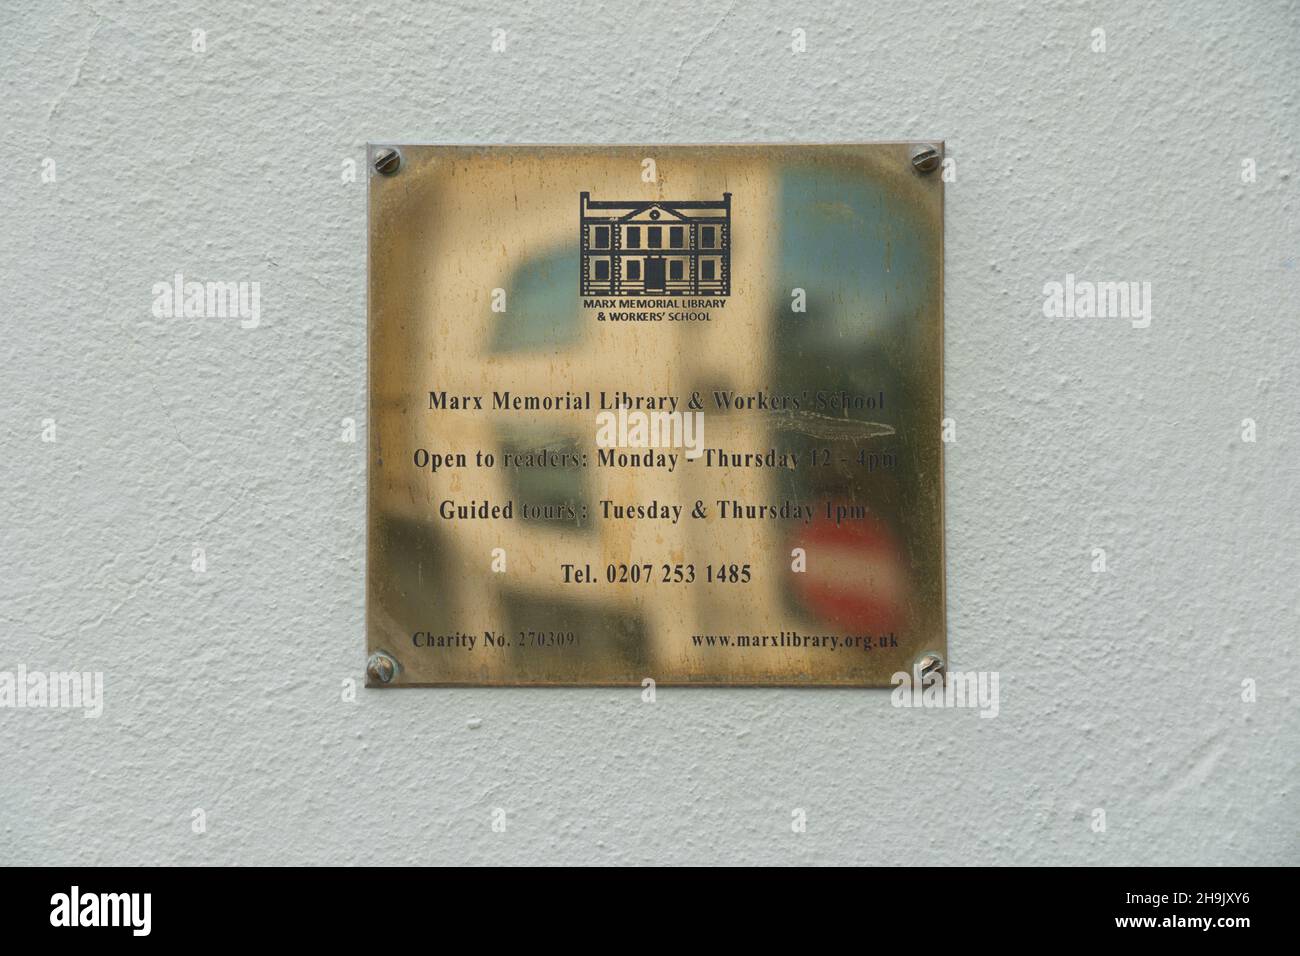 Name plate on the Karl Marx Memorial Library in Clerkenwell Green, London. It is the 200th anniversary of Marx's birth on May 6, 2018. Photo date: Wednesday, May 2, 2018. Photo credit should read: Richard Gray/EMPICS Stock Photo